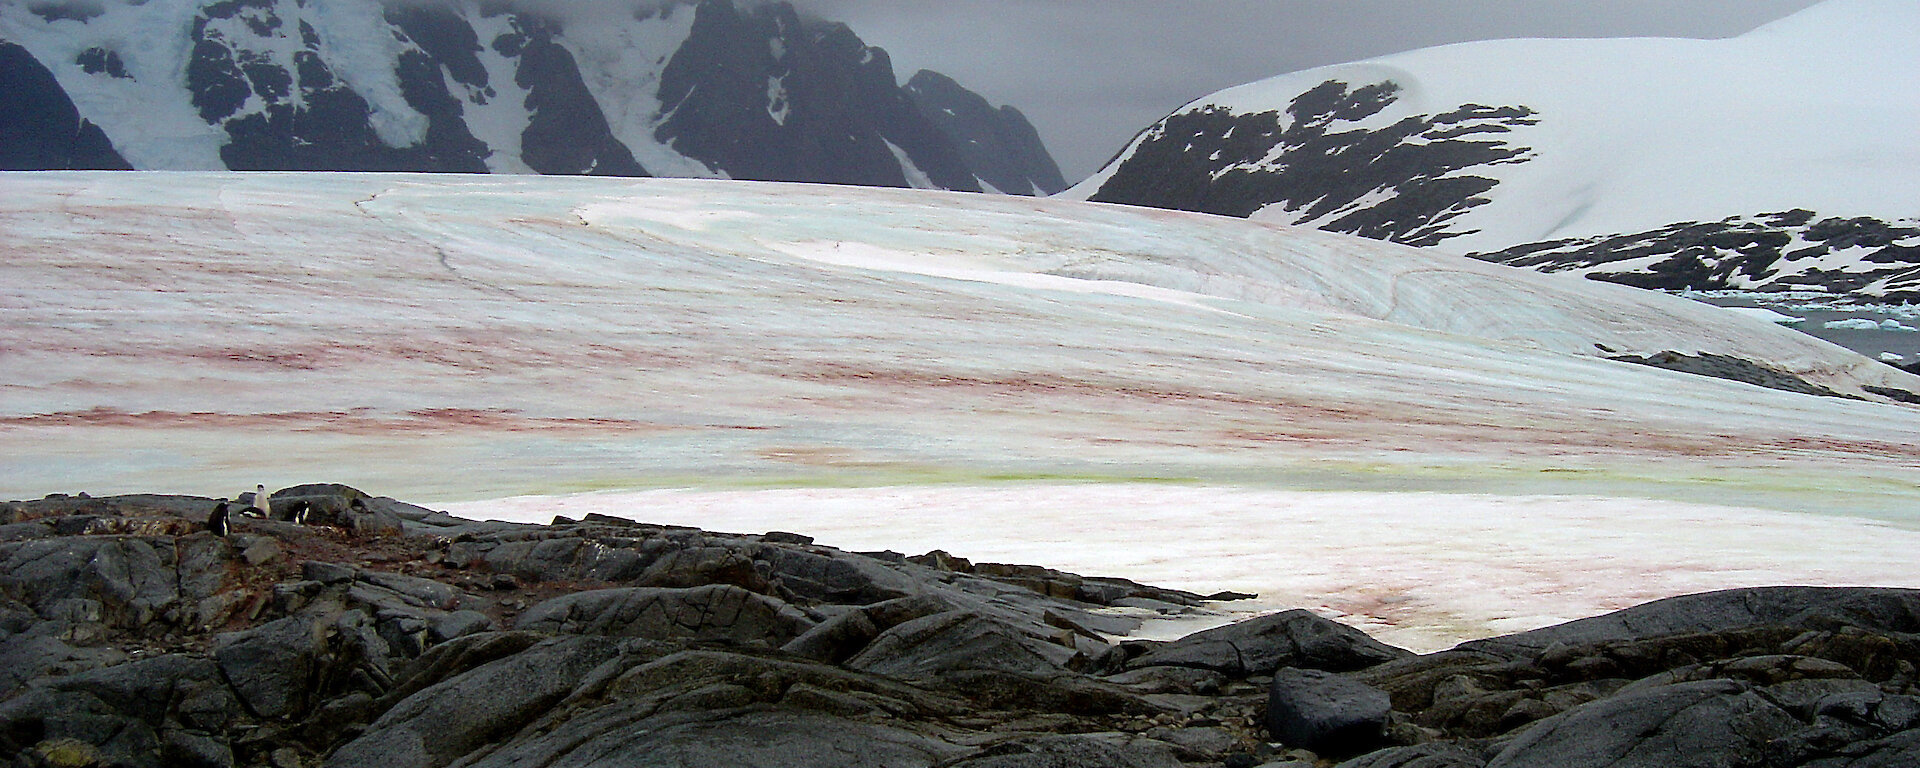 Algae on ice creating green and brown stripey bands with mountains in background